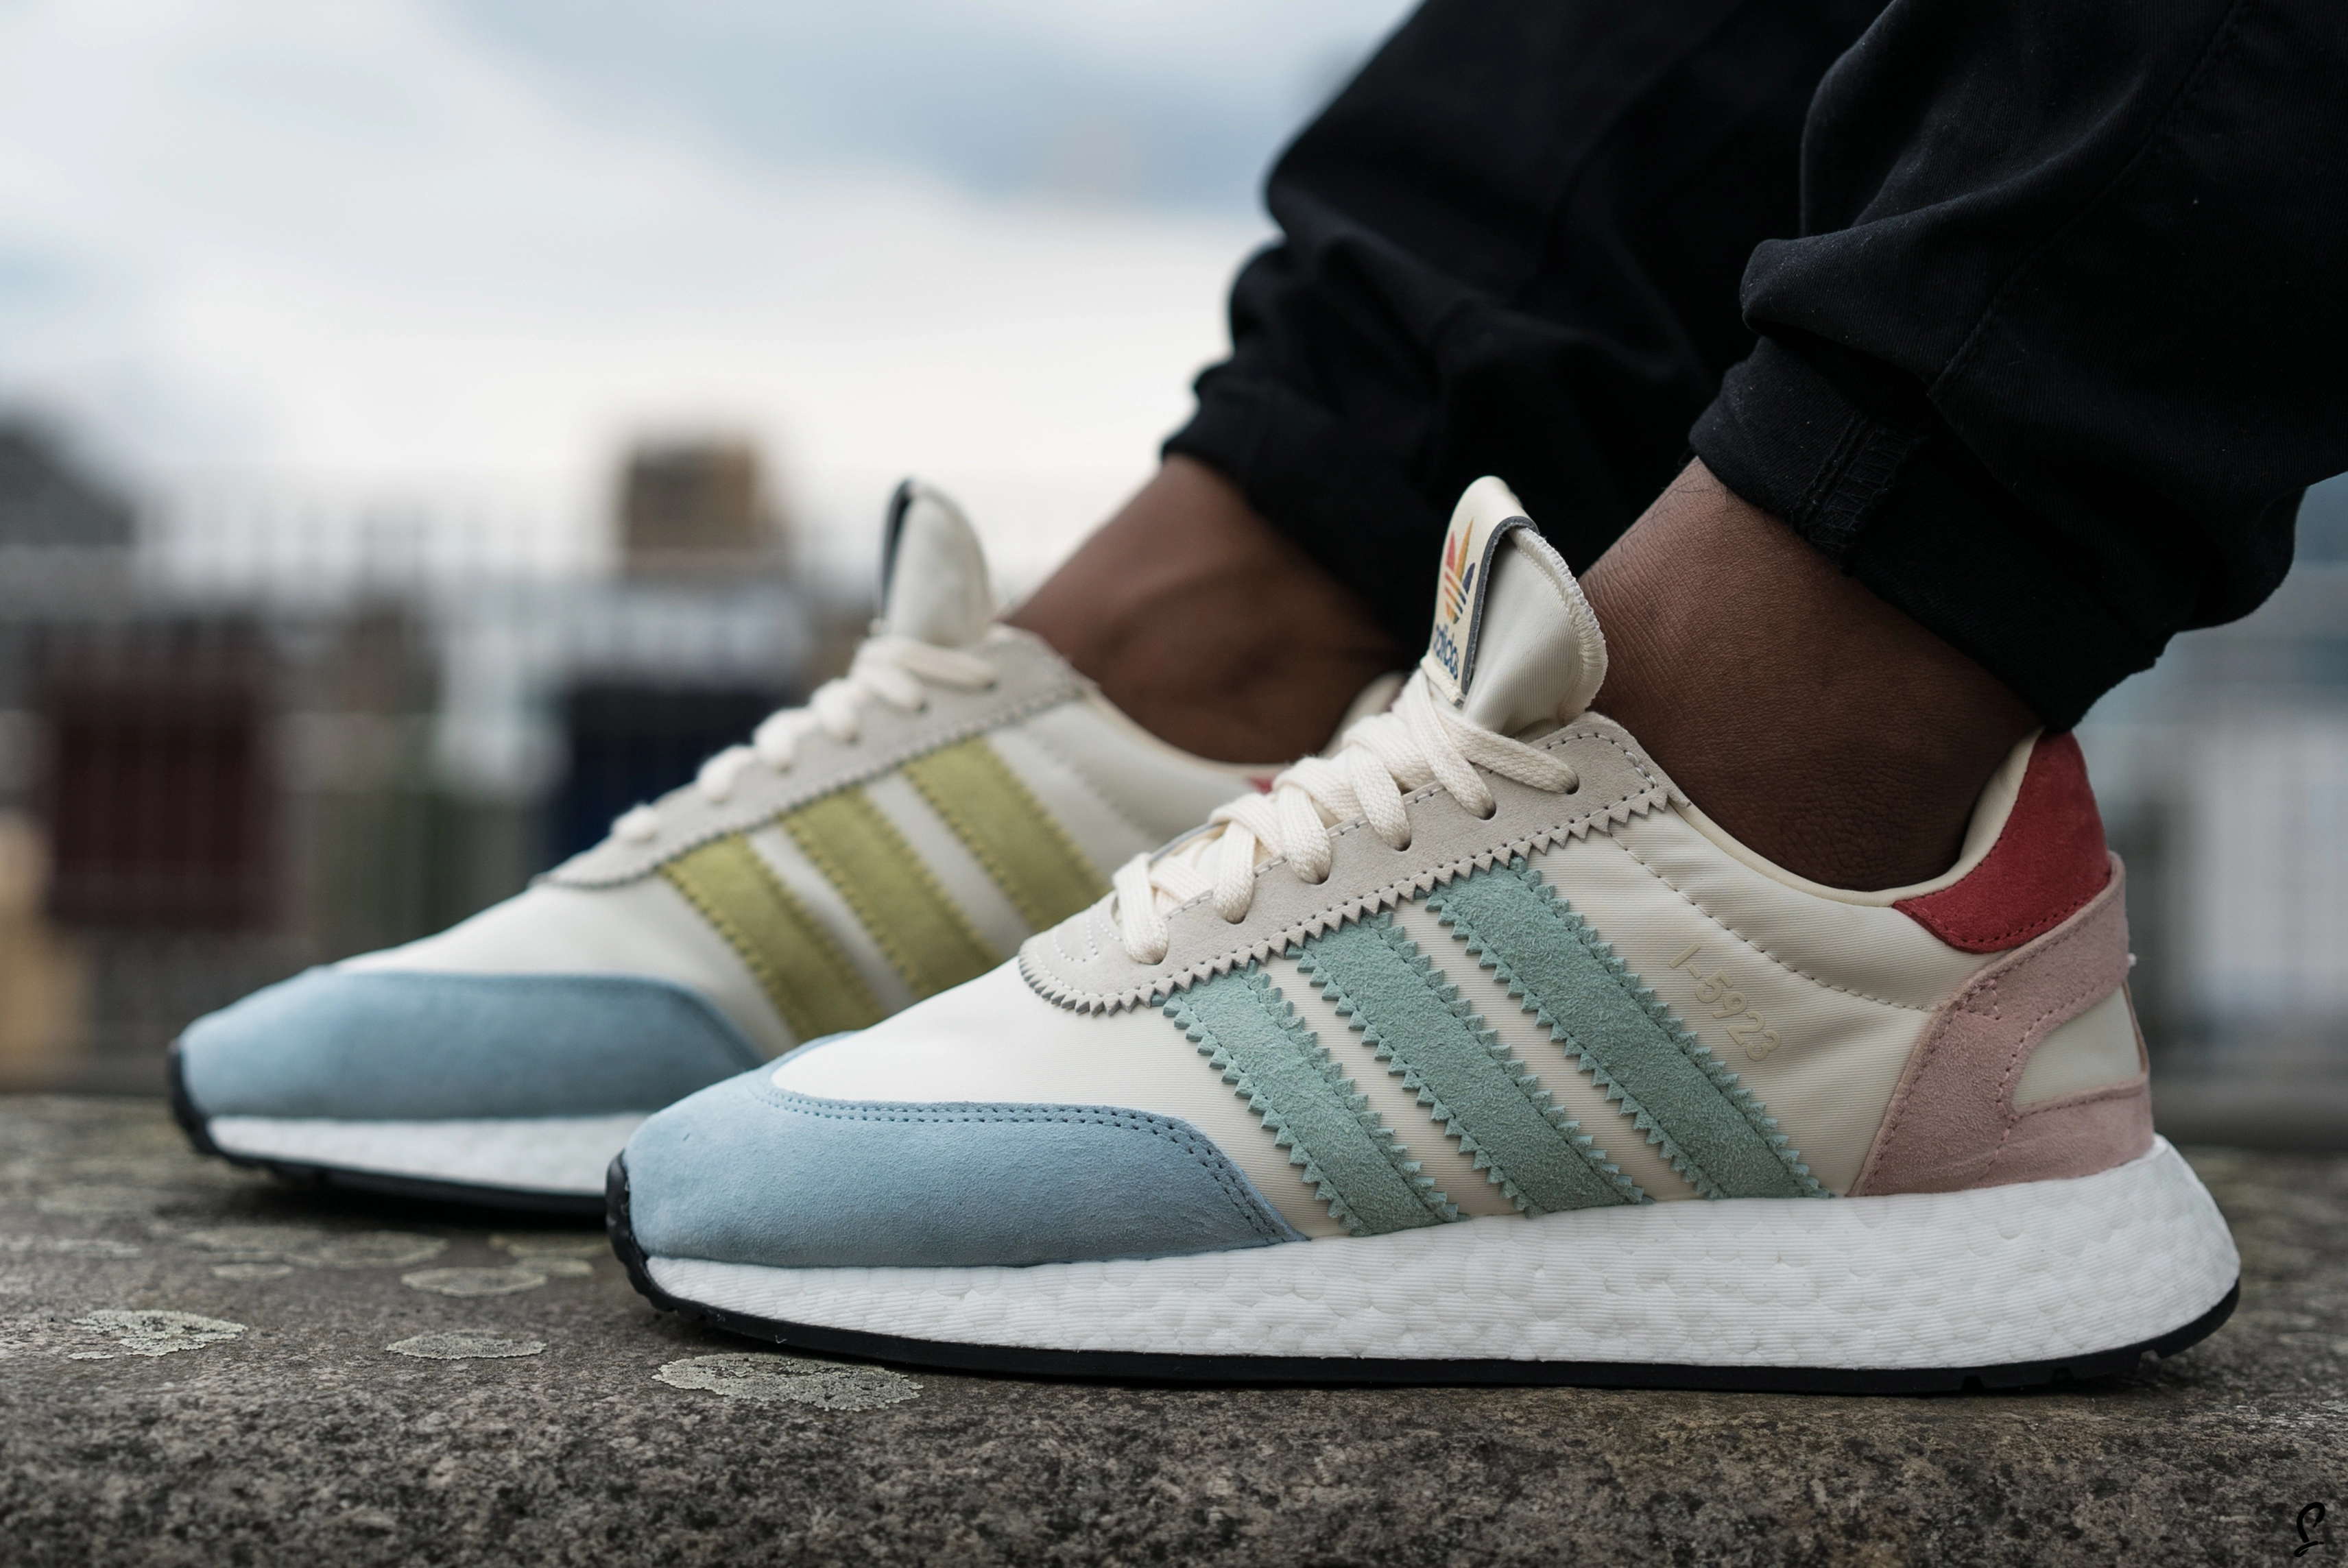 Taste The Rainbow With The adidas system I-5923 ‘Pride’